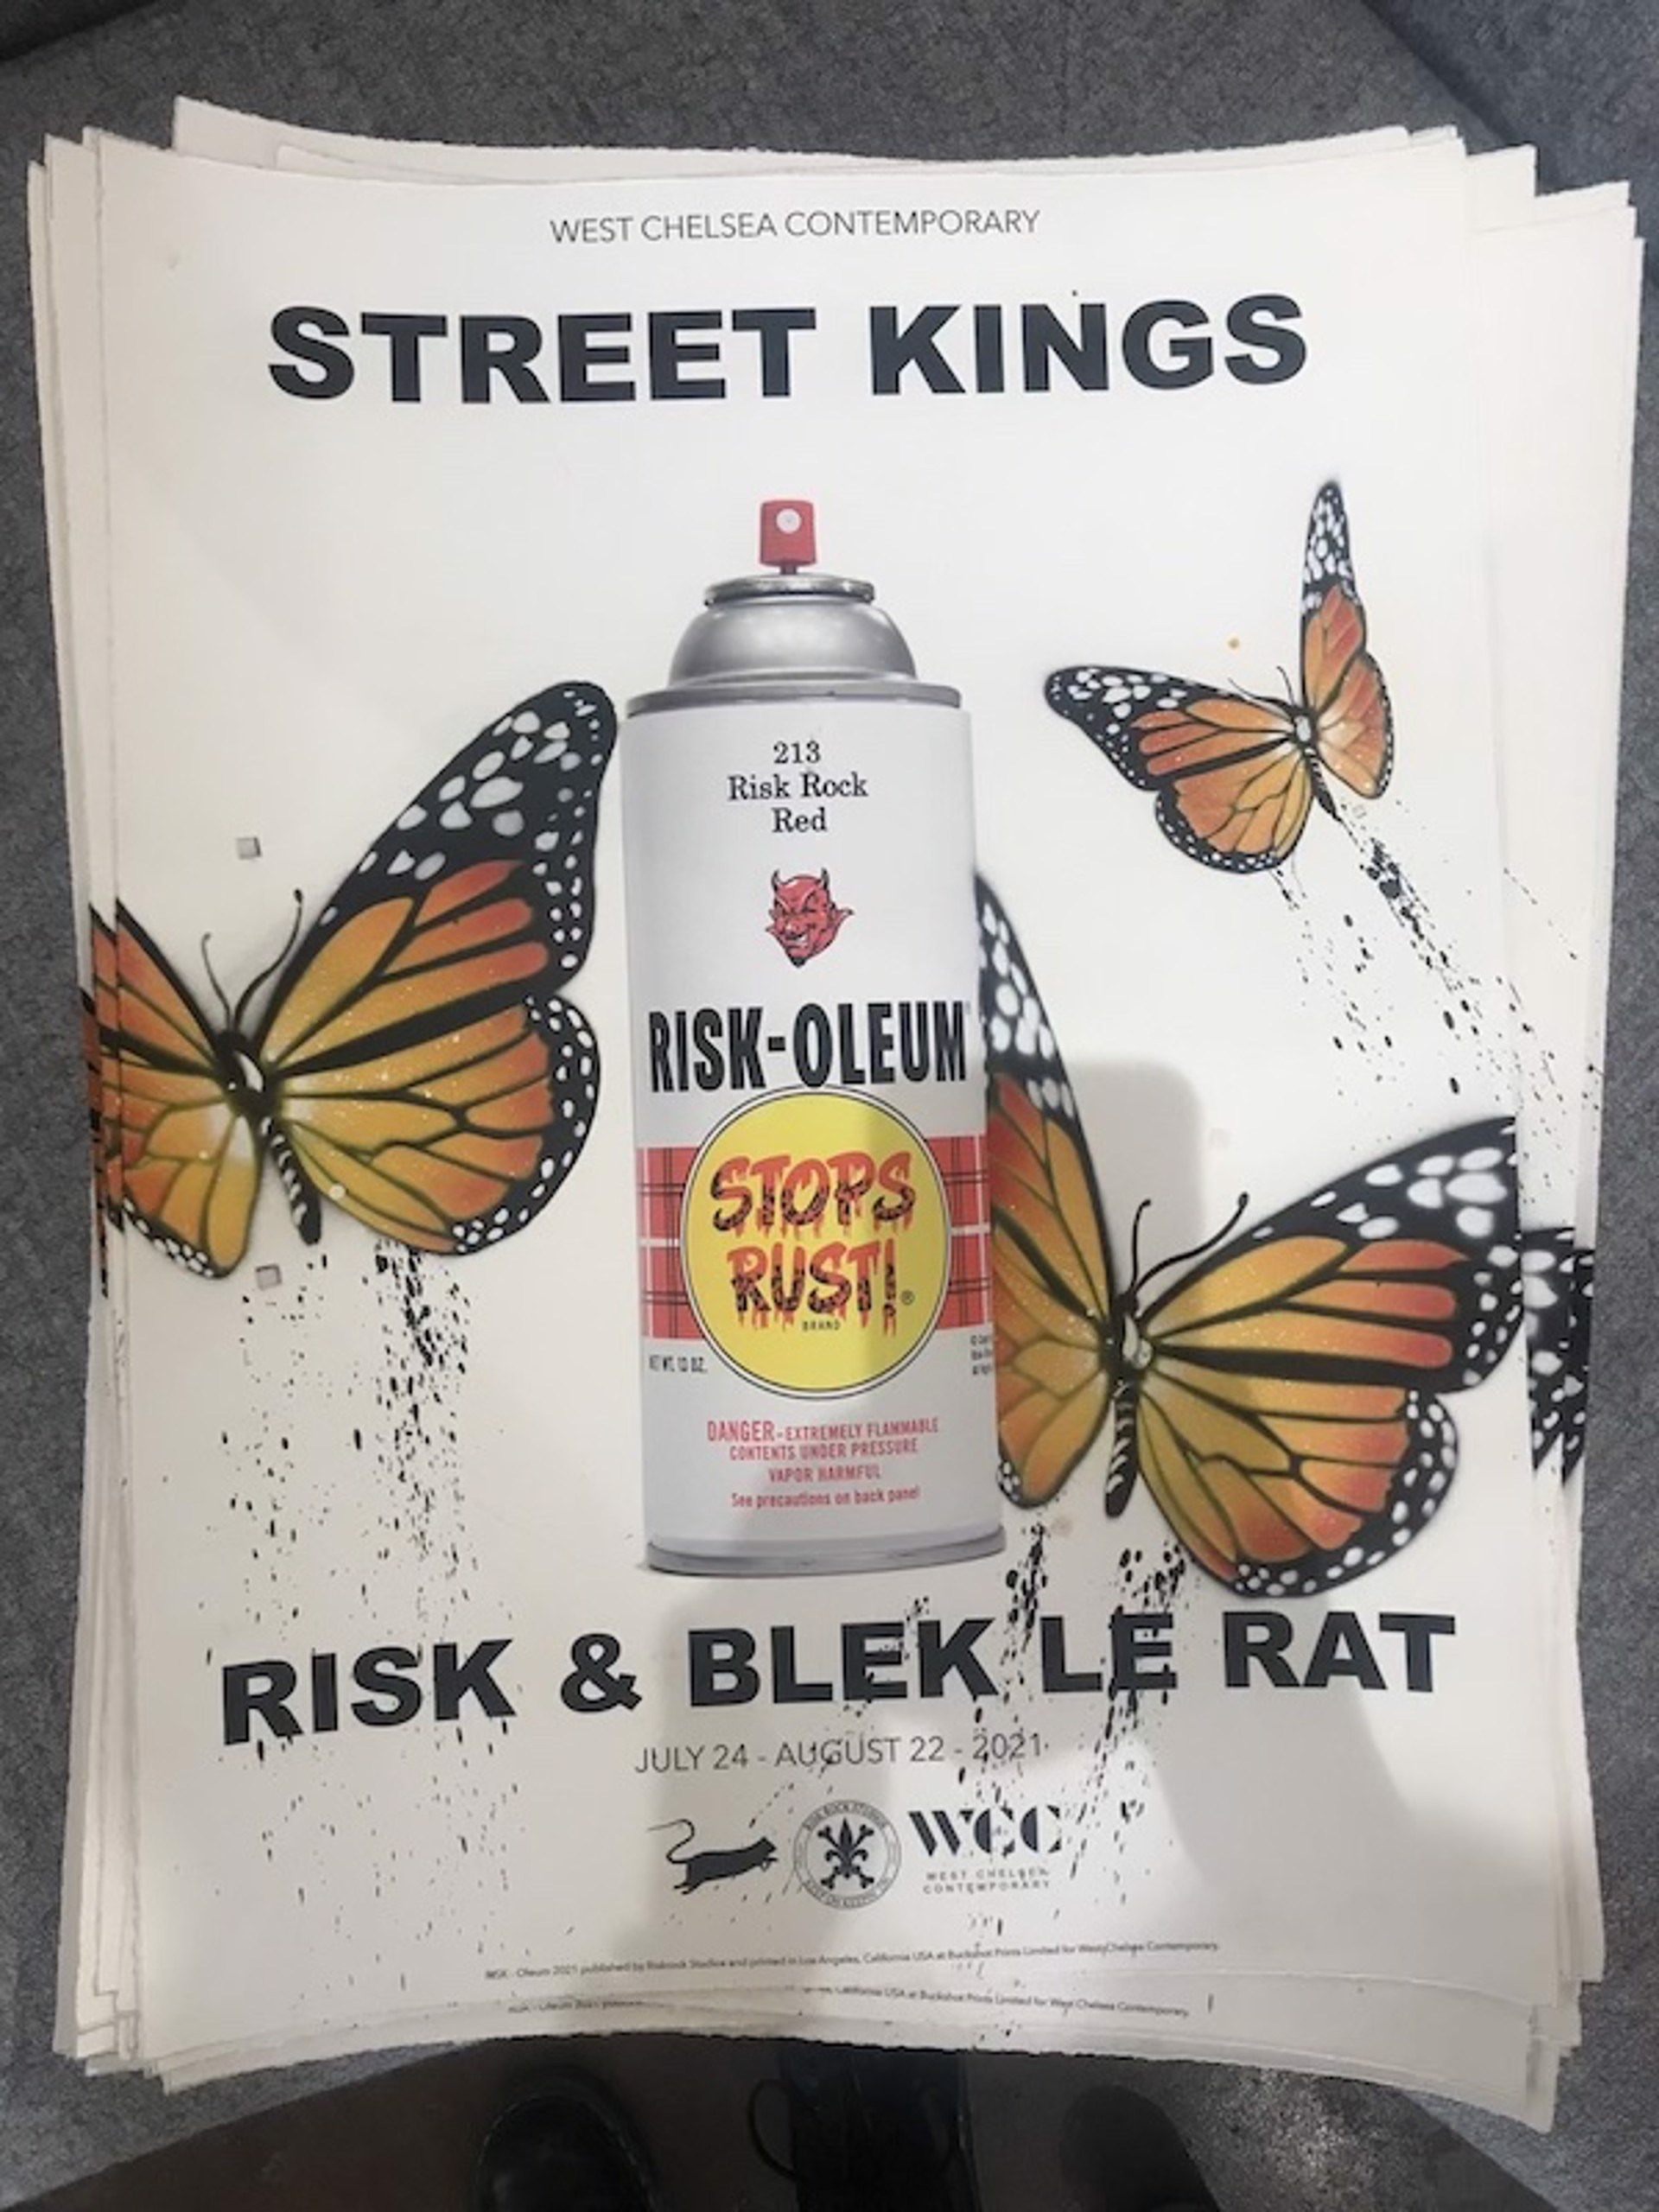 Street Kings Show Print (42/50) by Risk